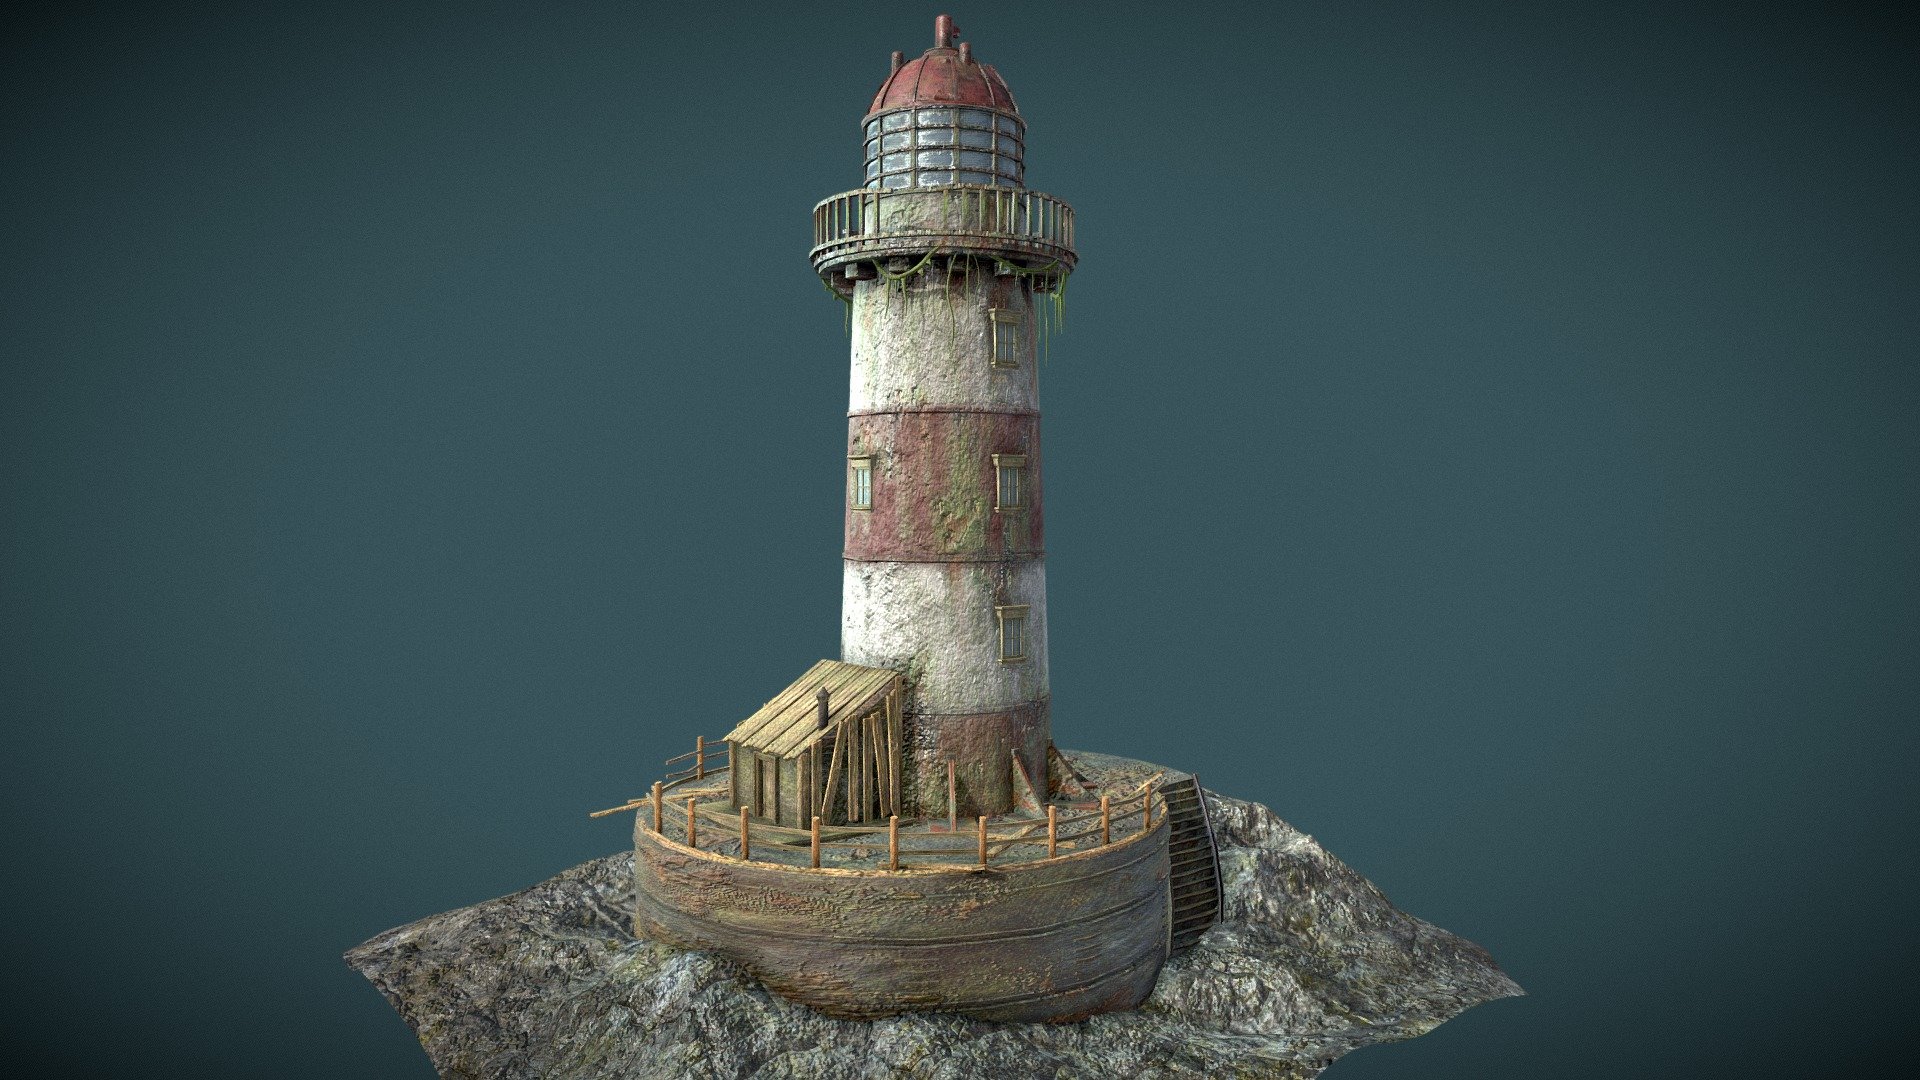 Abandoned Lighthouse

This is another personal project I completed as part of a series of environment pieces I've been aiming to interconnect in a game engine. I wanted to focus on modular asset development to prep for larger projects in the future. I also got to try out some excellent terrain brushes that I recently purchased for ZBrush. I went for an aged Lighthouse as it appealed more to my style/sensibilities (clean is boring). Overall, I'm very happy with the results 3d model